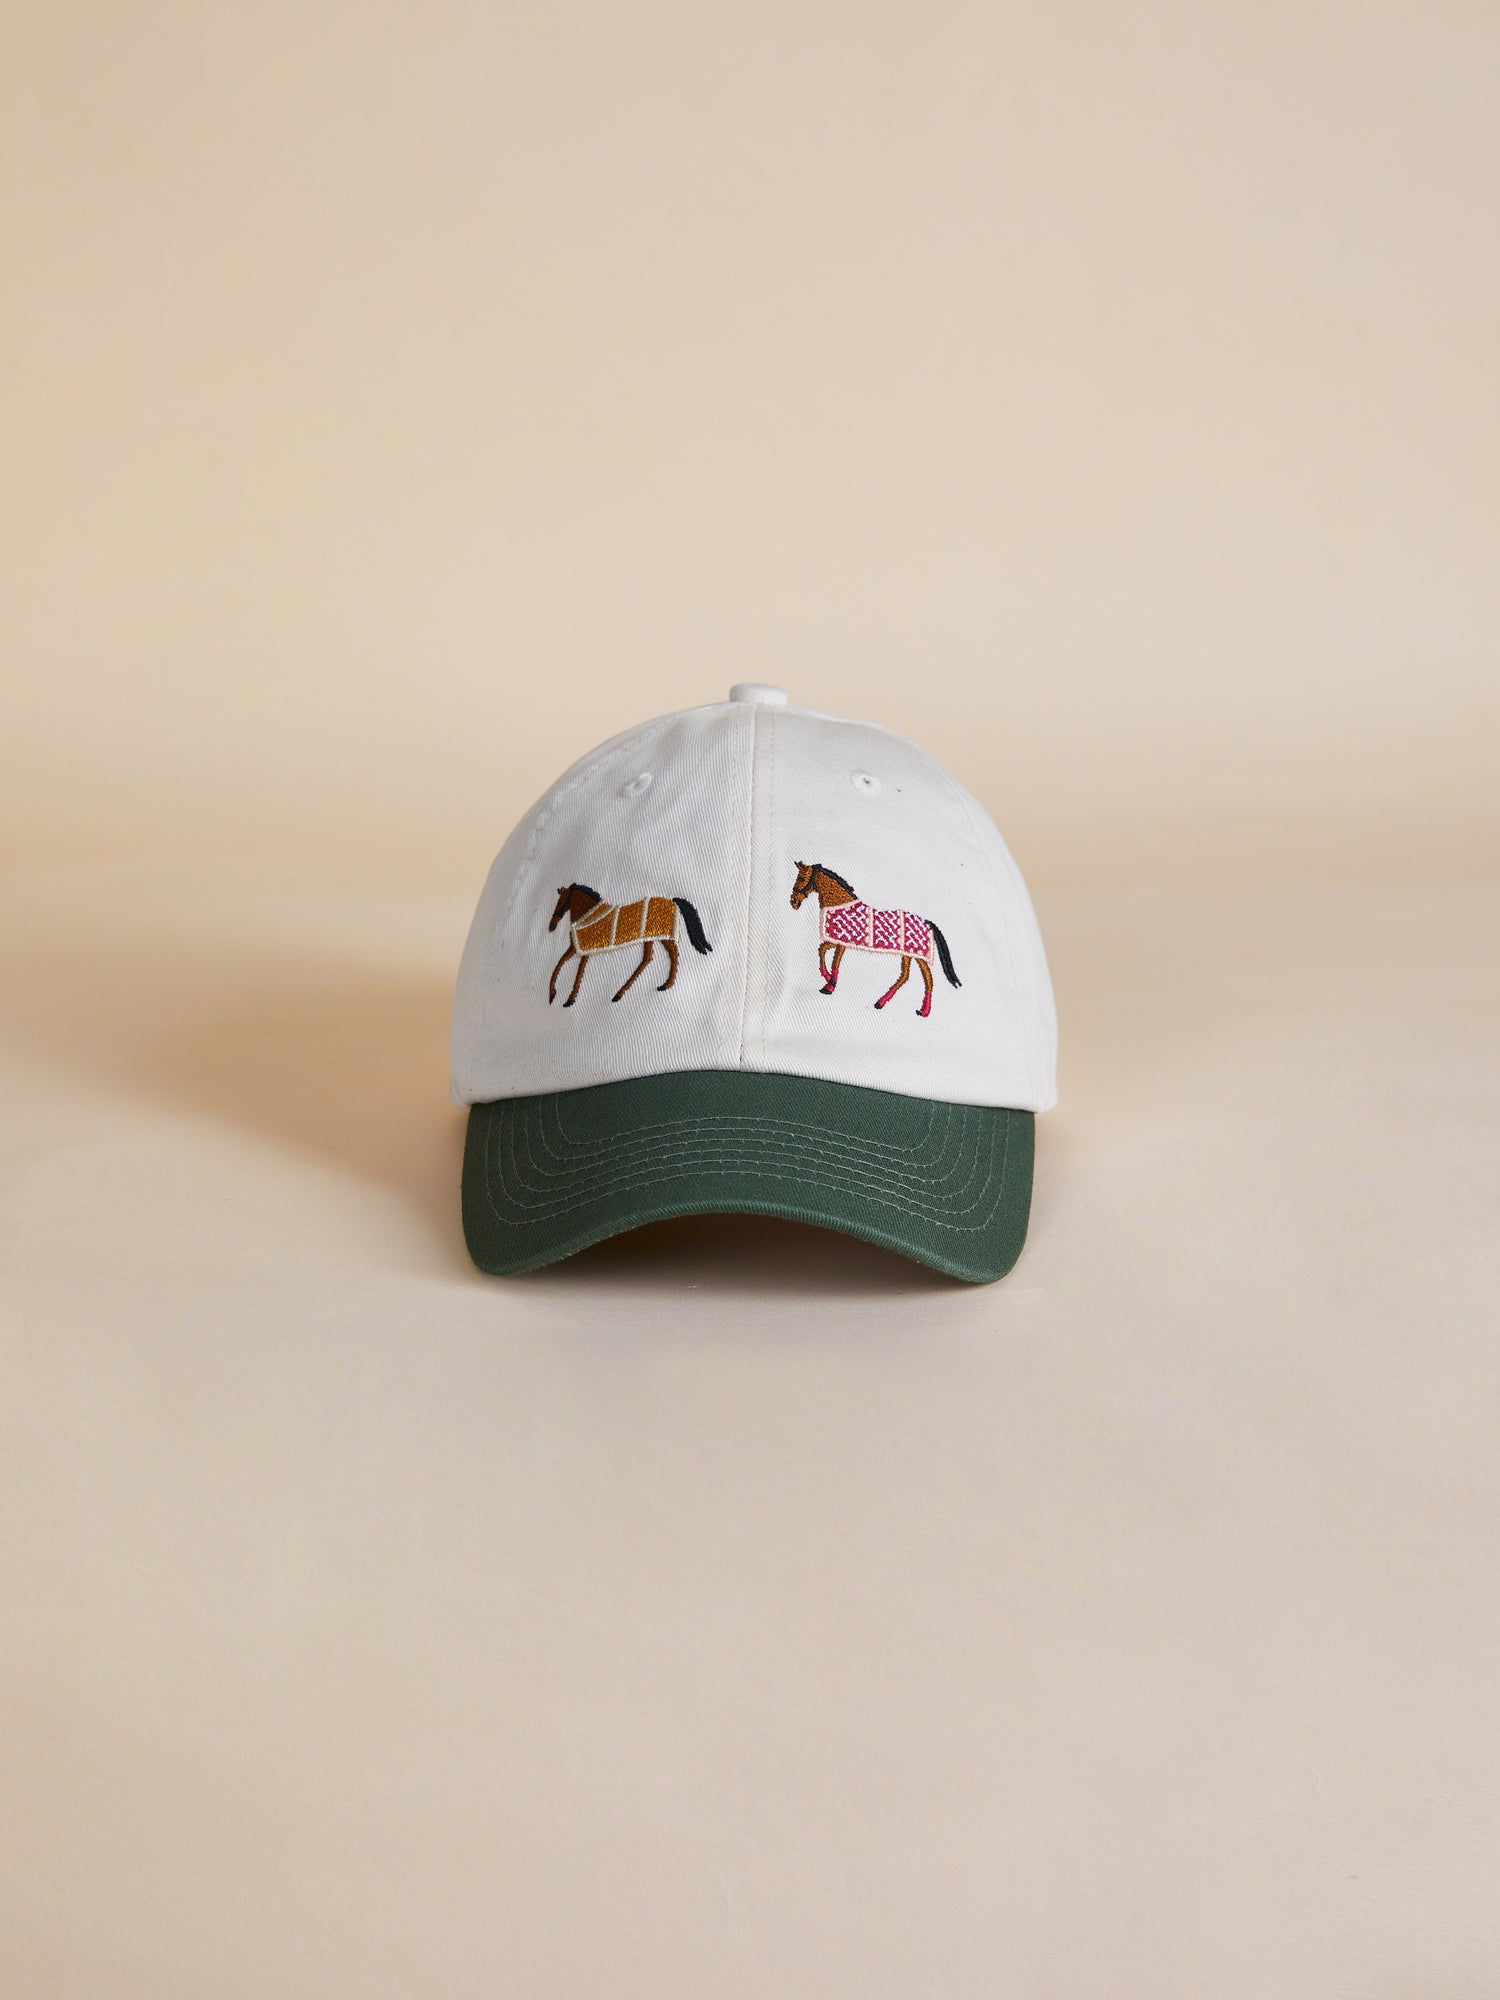 A Found Horse Equine Cap with two horses on it.